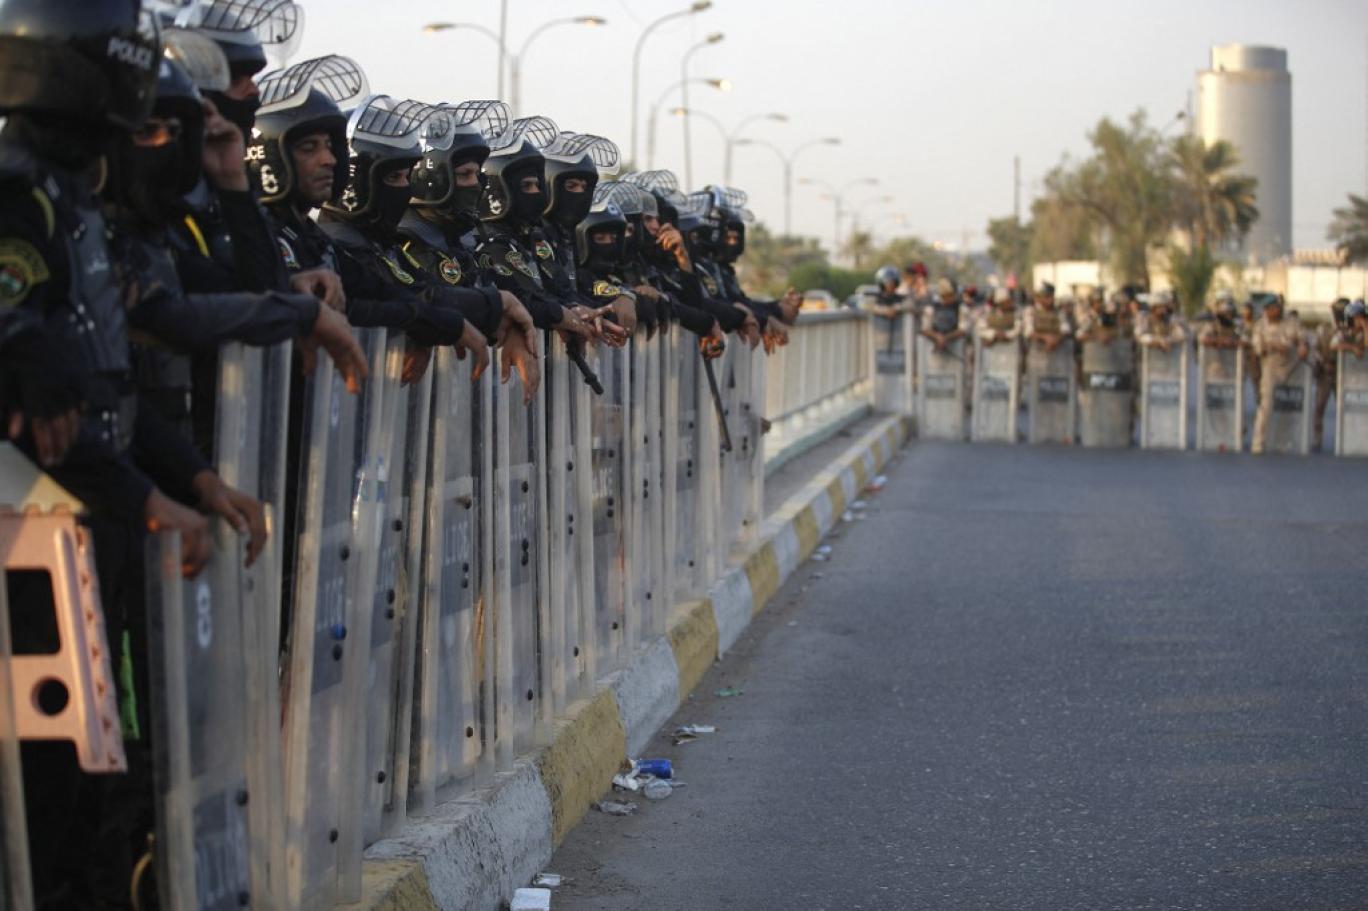 Iraq awaits the return of protests after ignoring Al-Sadrs warnings